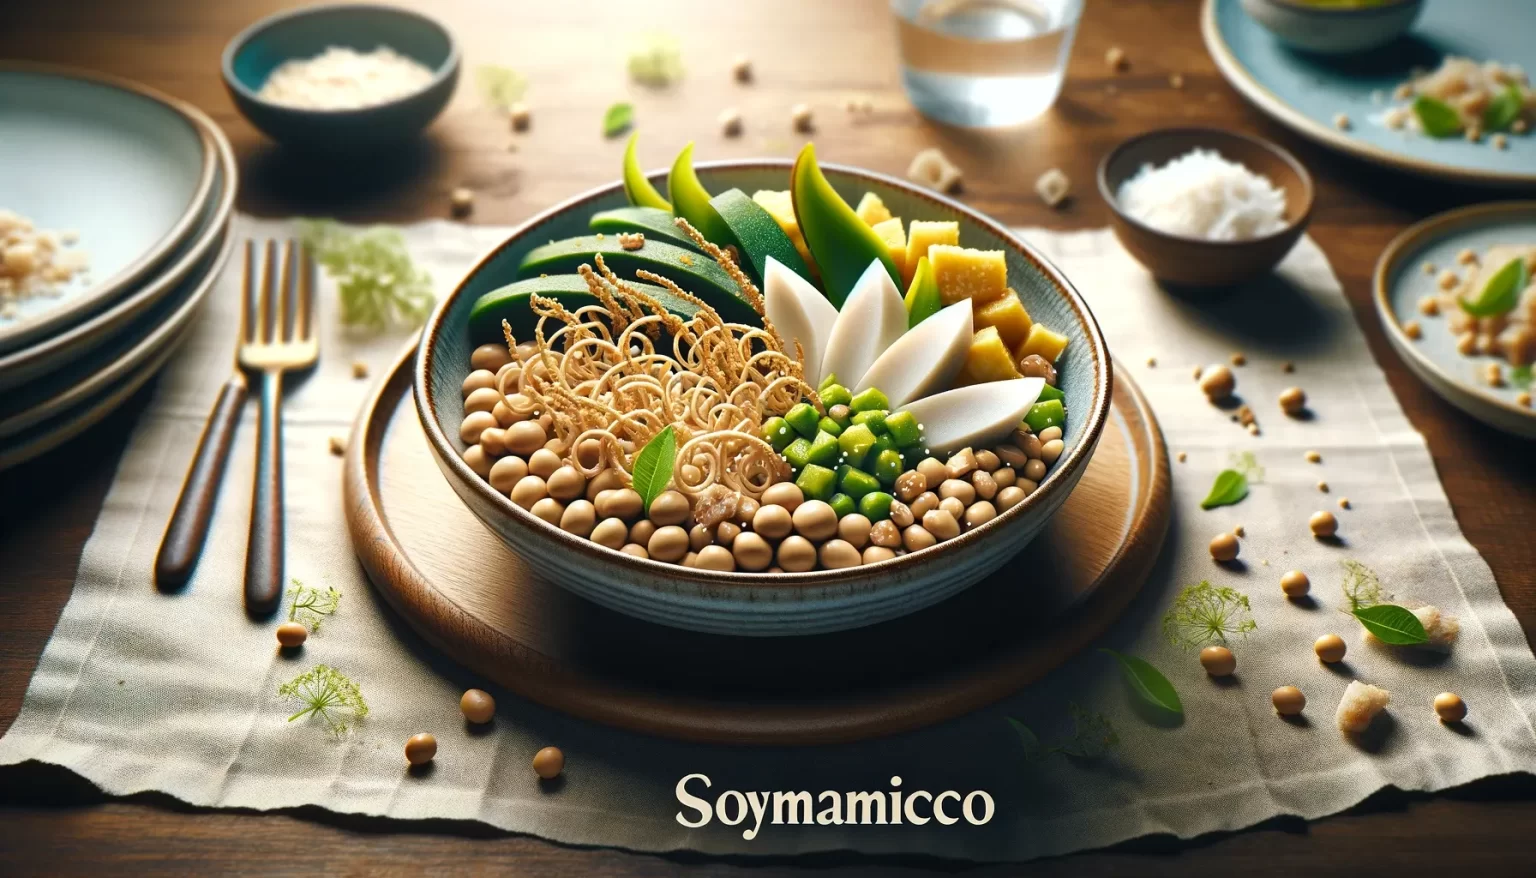 SoyMamicoco: A Taste of Home, A Journey of Taste and Health Benefits